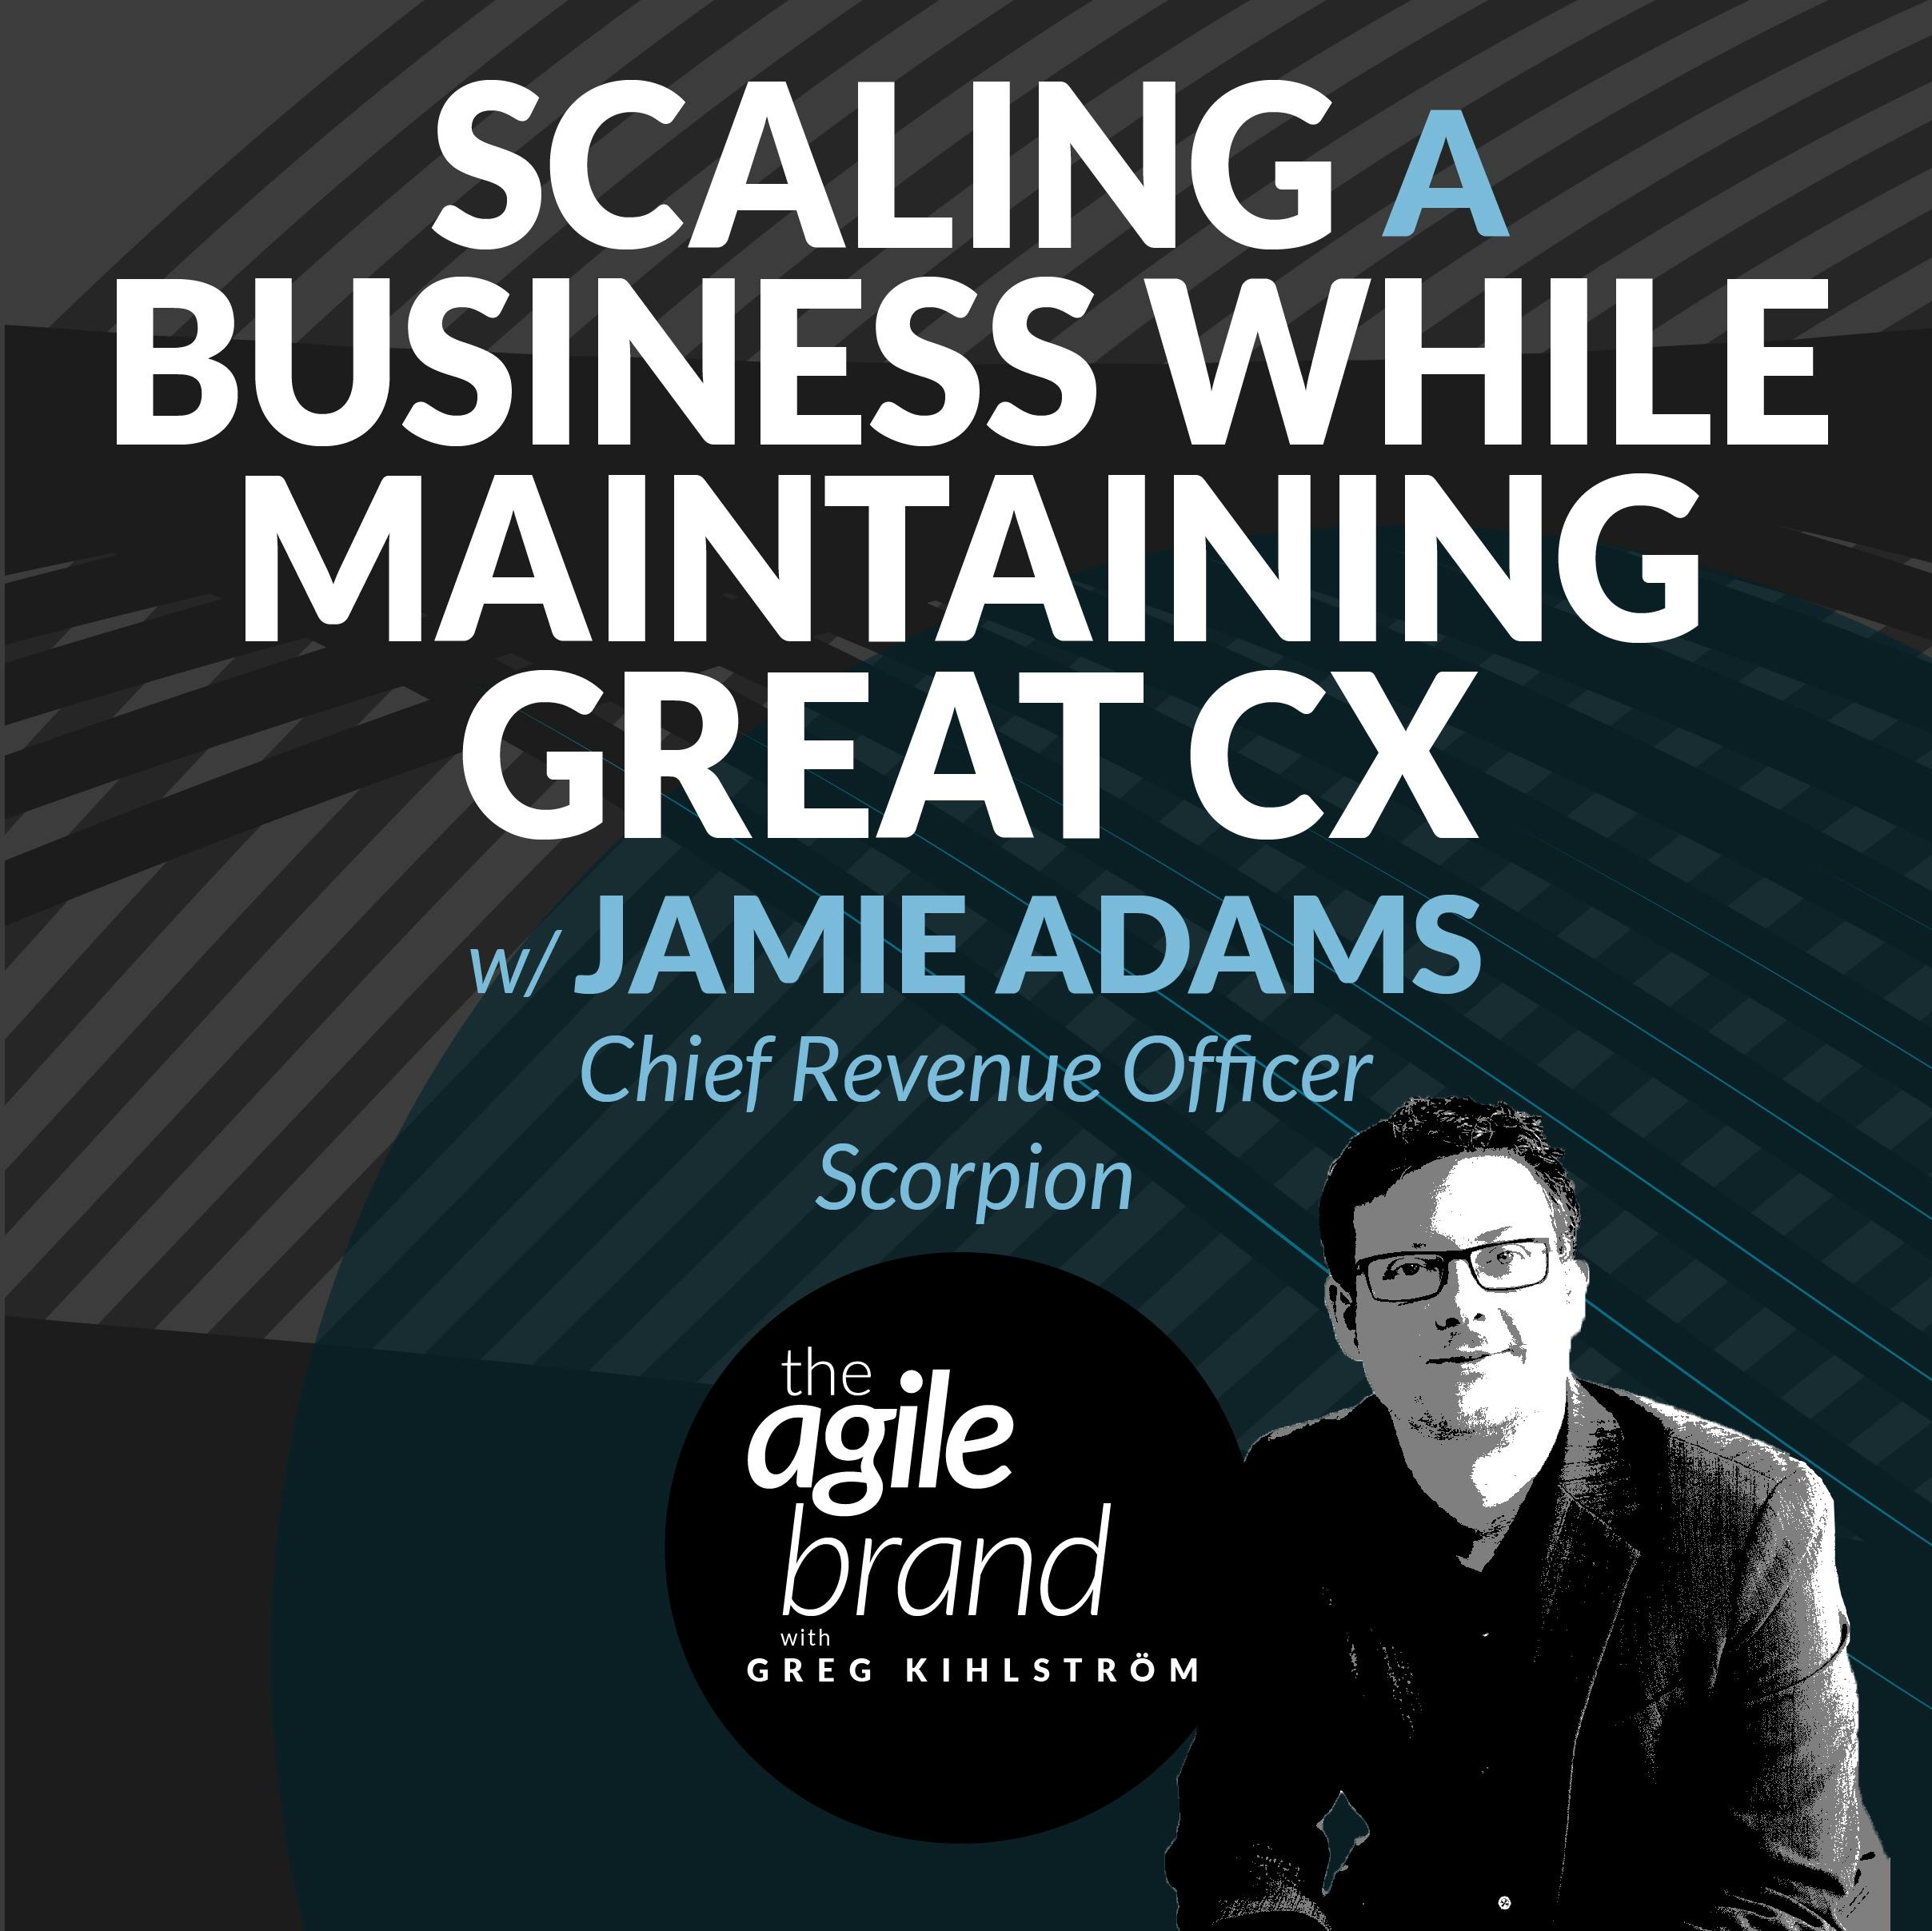 #400: Scaling professional services while maintaining CX and customer results, with Jamie Adams, Scorpion